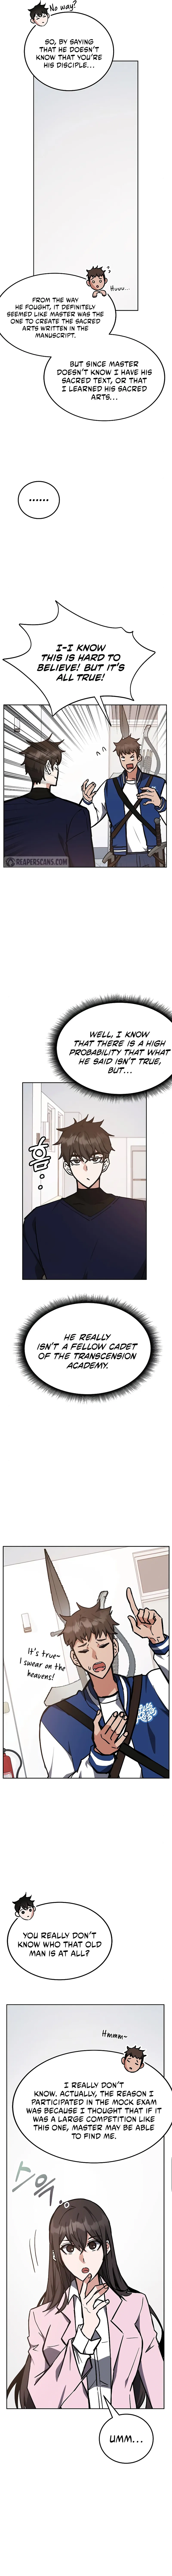 Transcension Academy Chapter 40 page 9